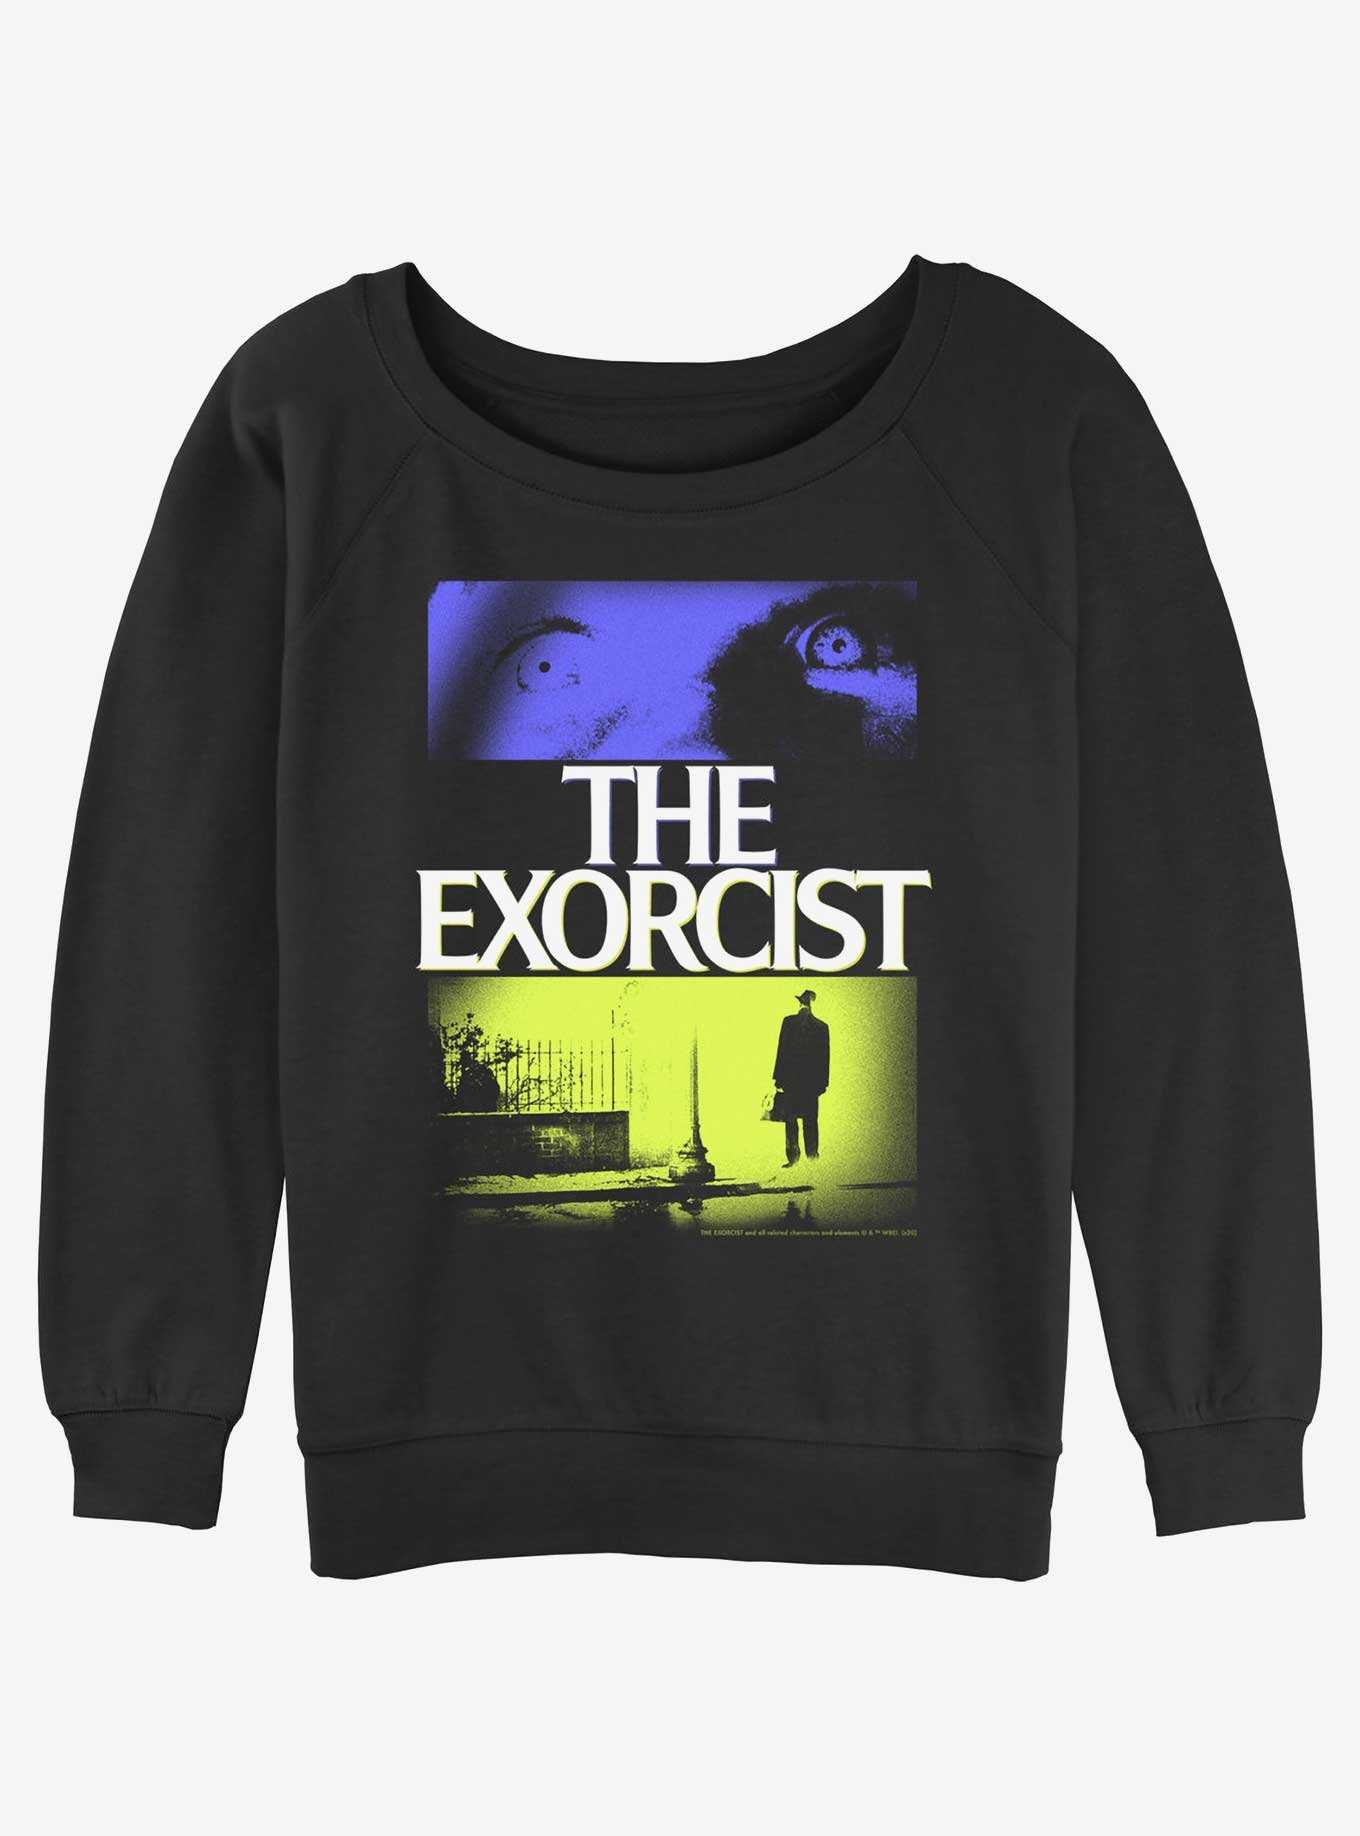 The Exorcist Pop Poster Girls Slouchy Sweatshirt, , hi-res